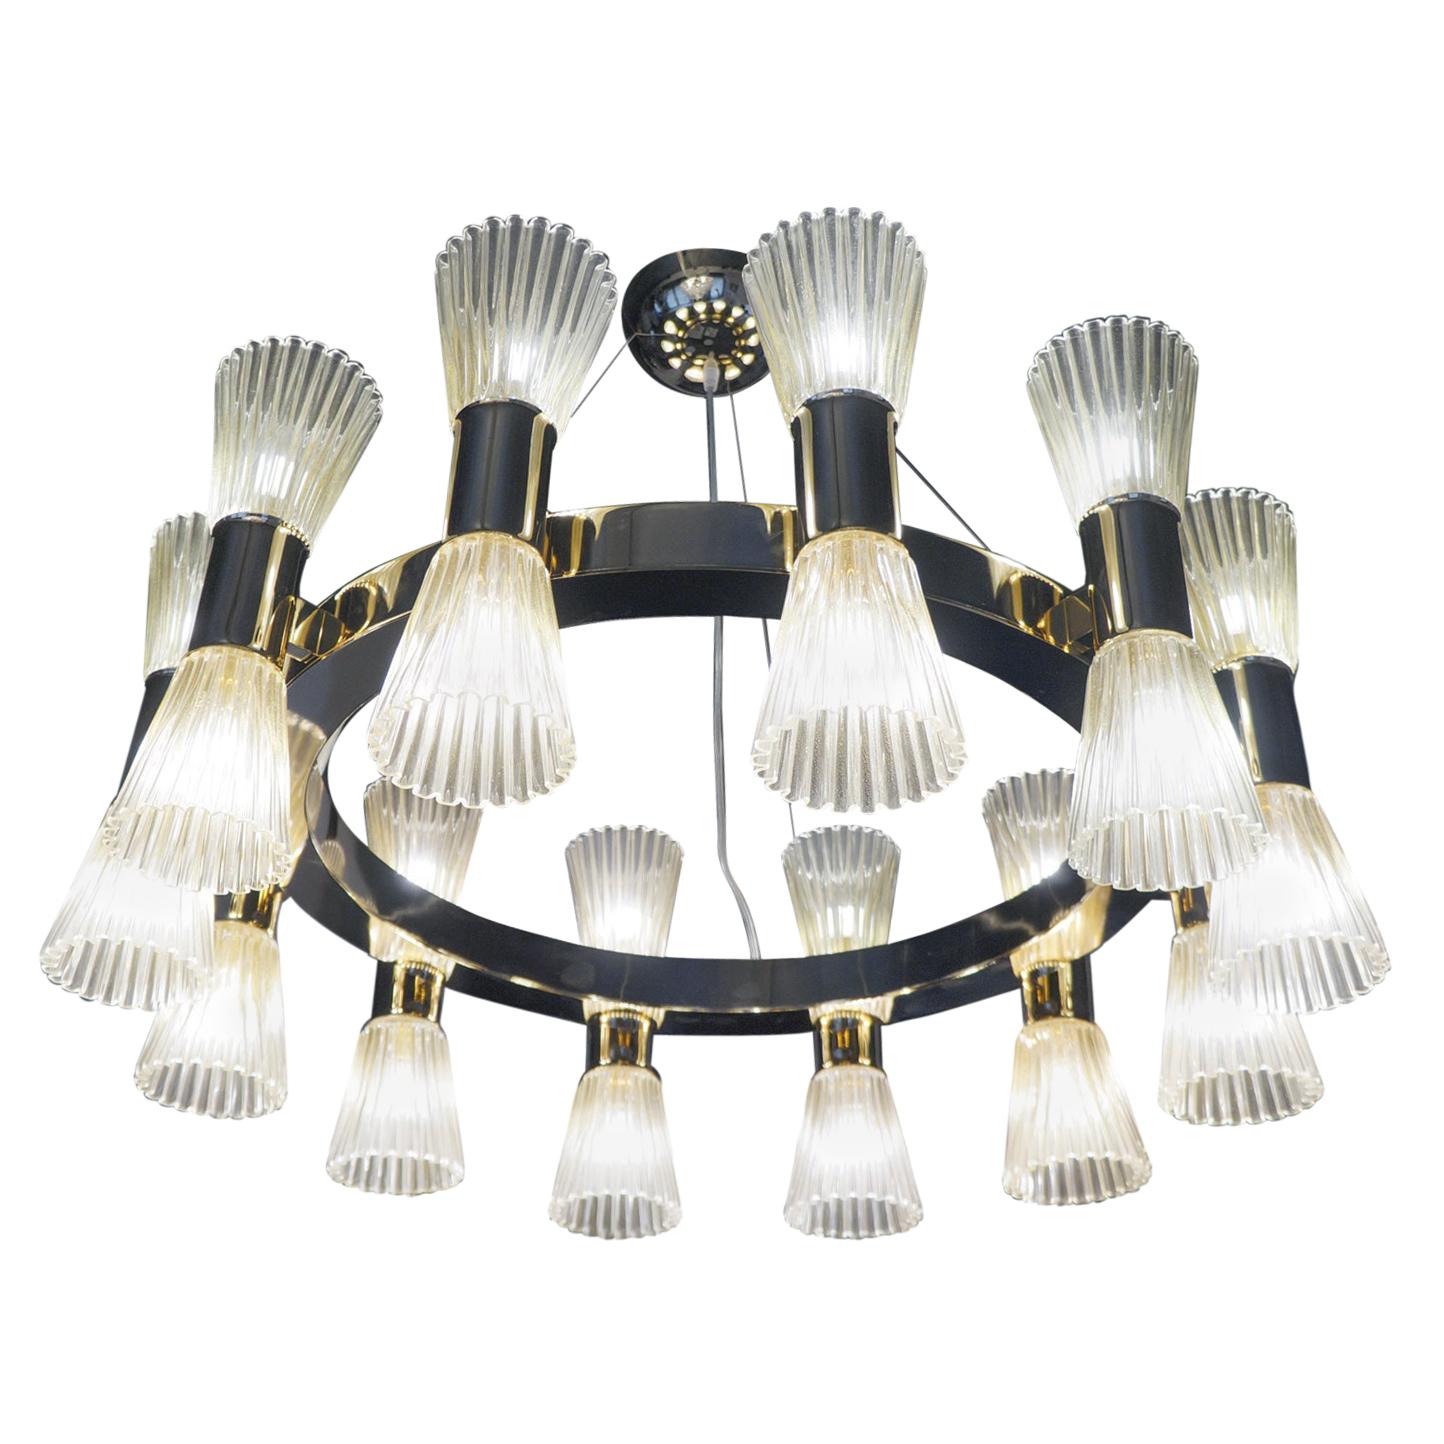 Dona Furnace Mid-Century Modern Gold Murano Glass Chandelier Round, 1998 For Sale